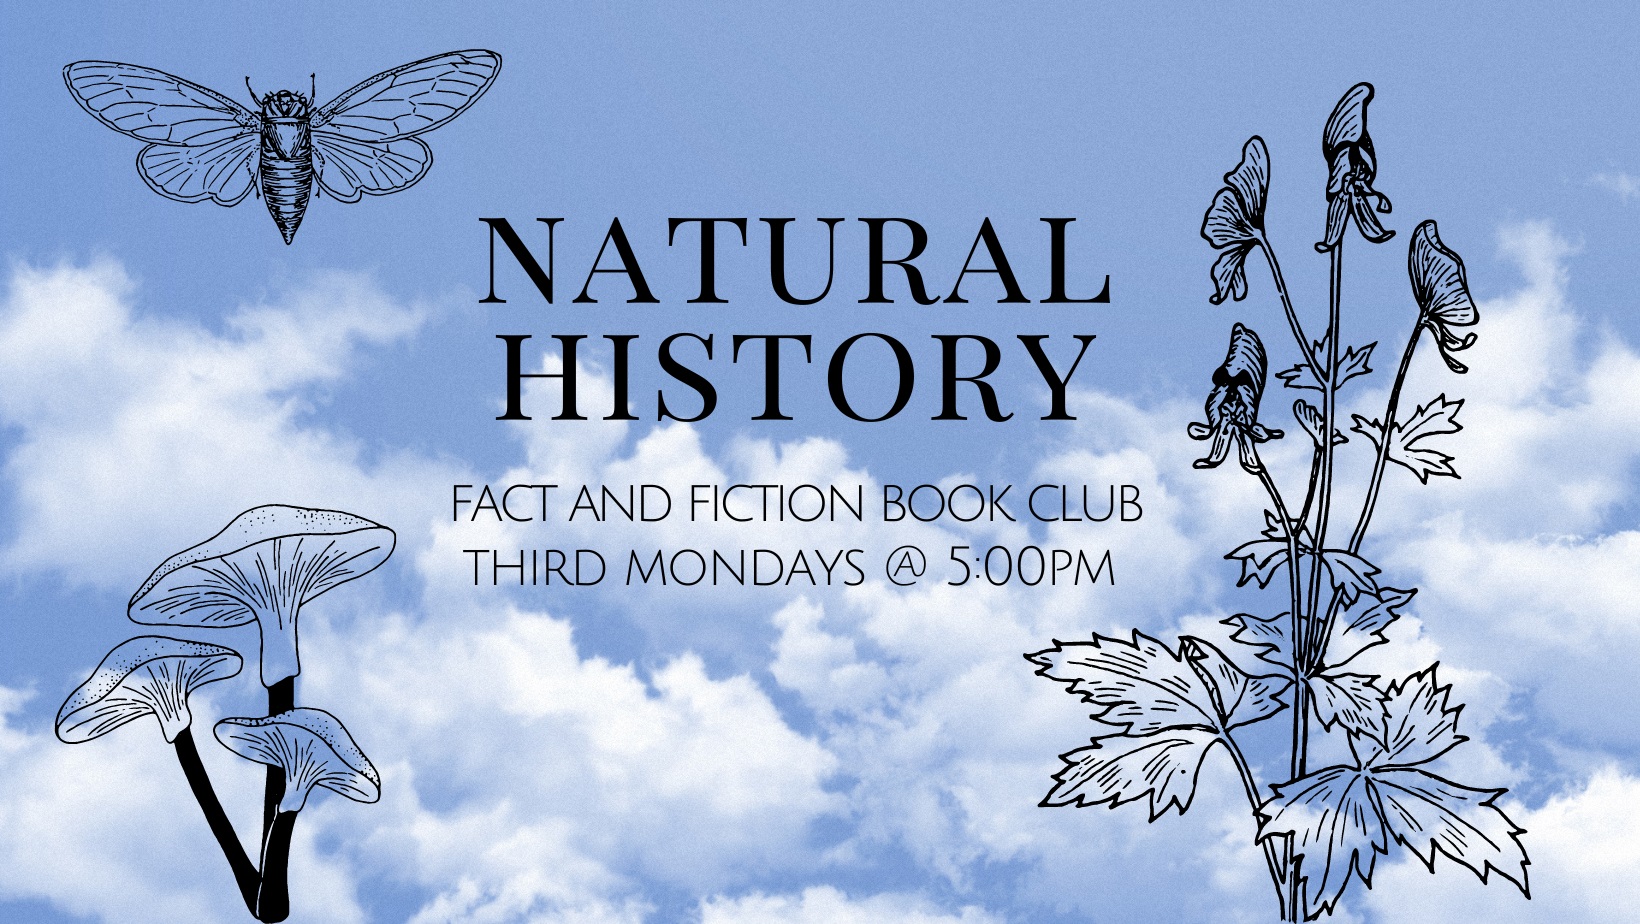 Natural History Fact and Fiction Book Club